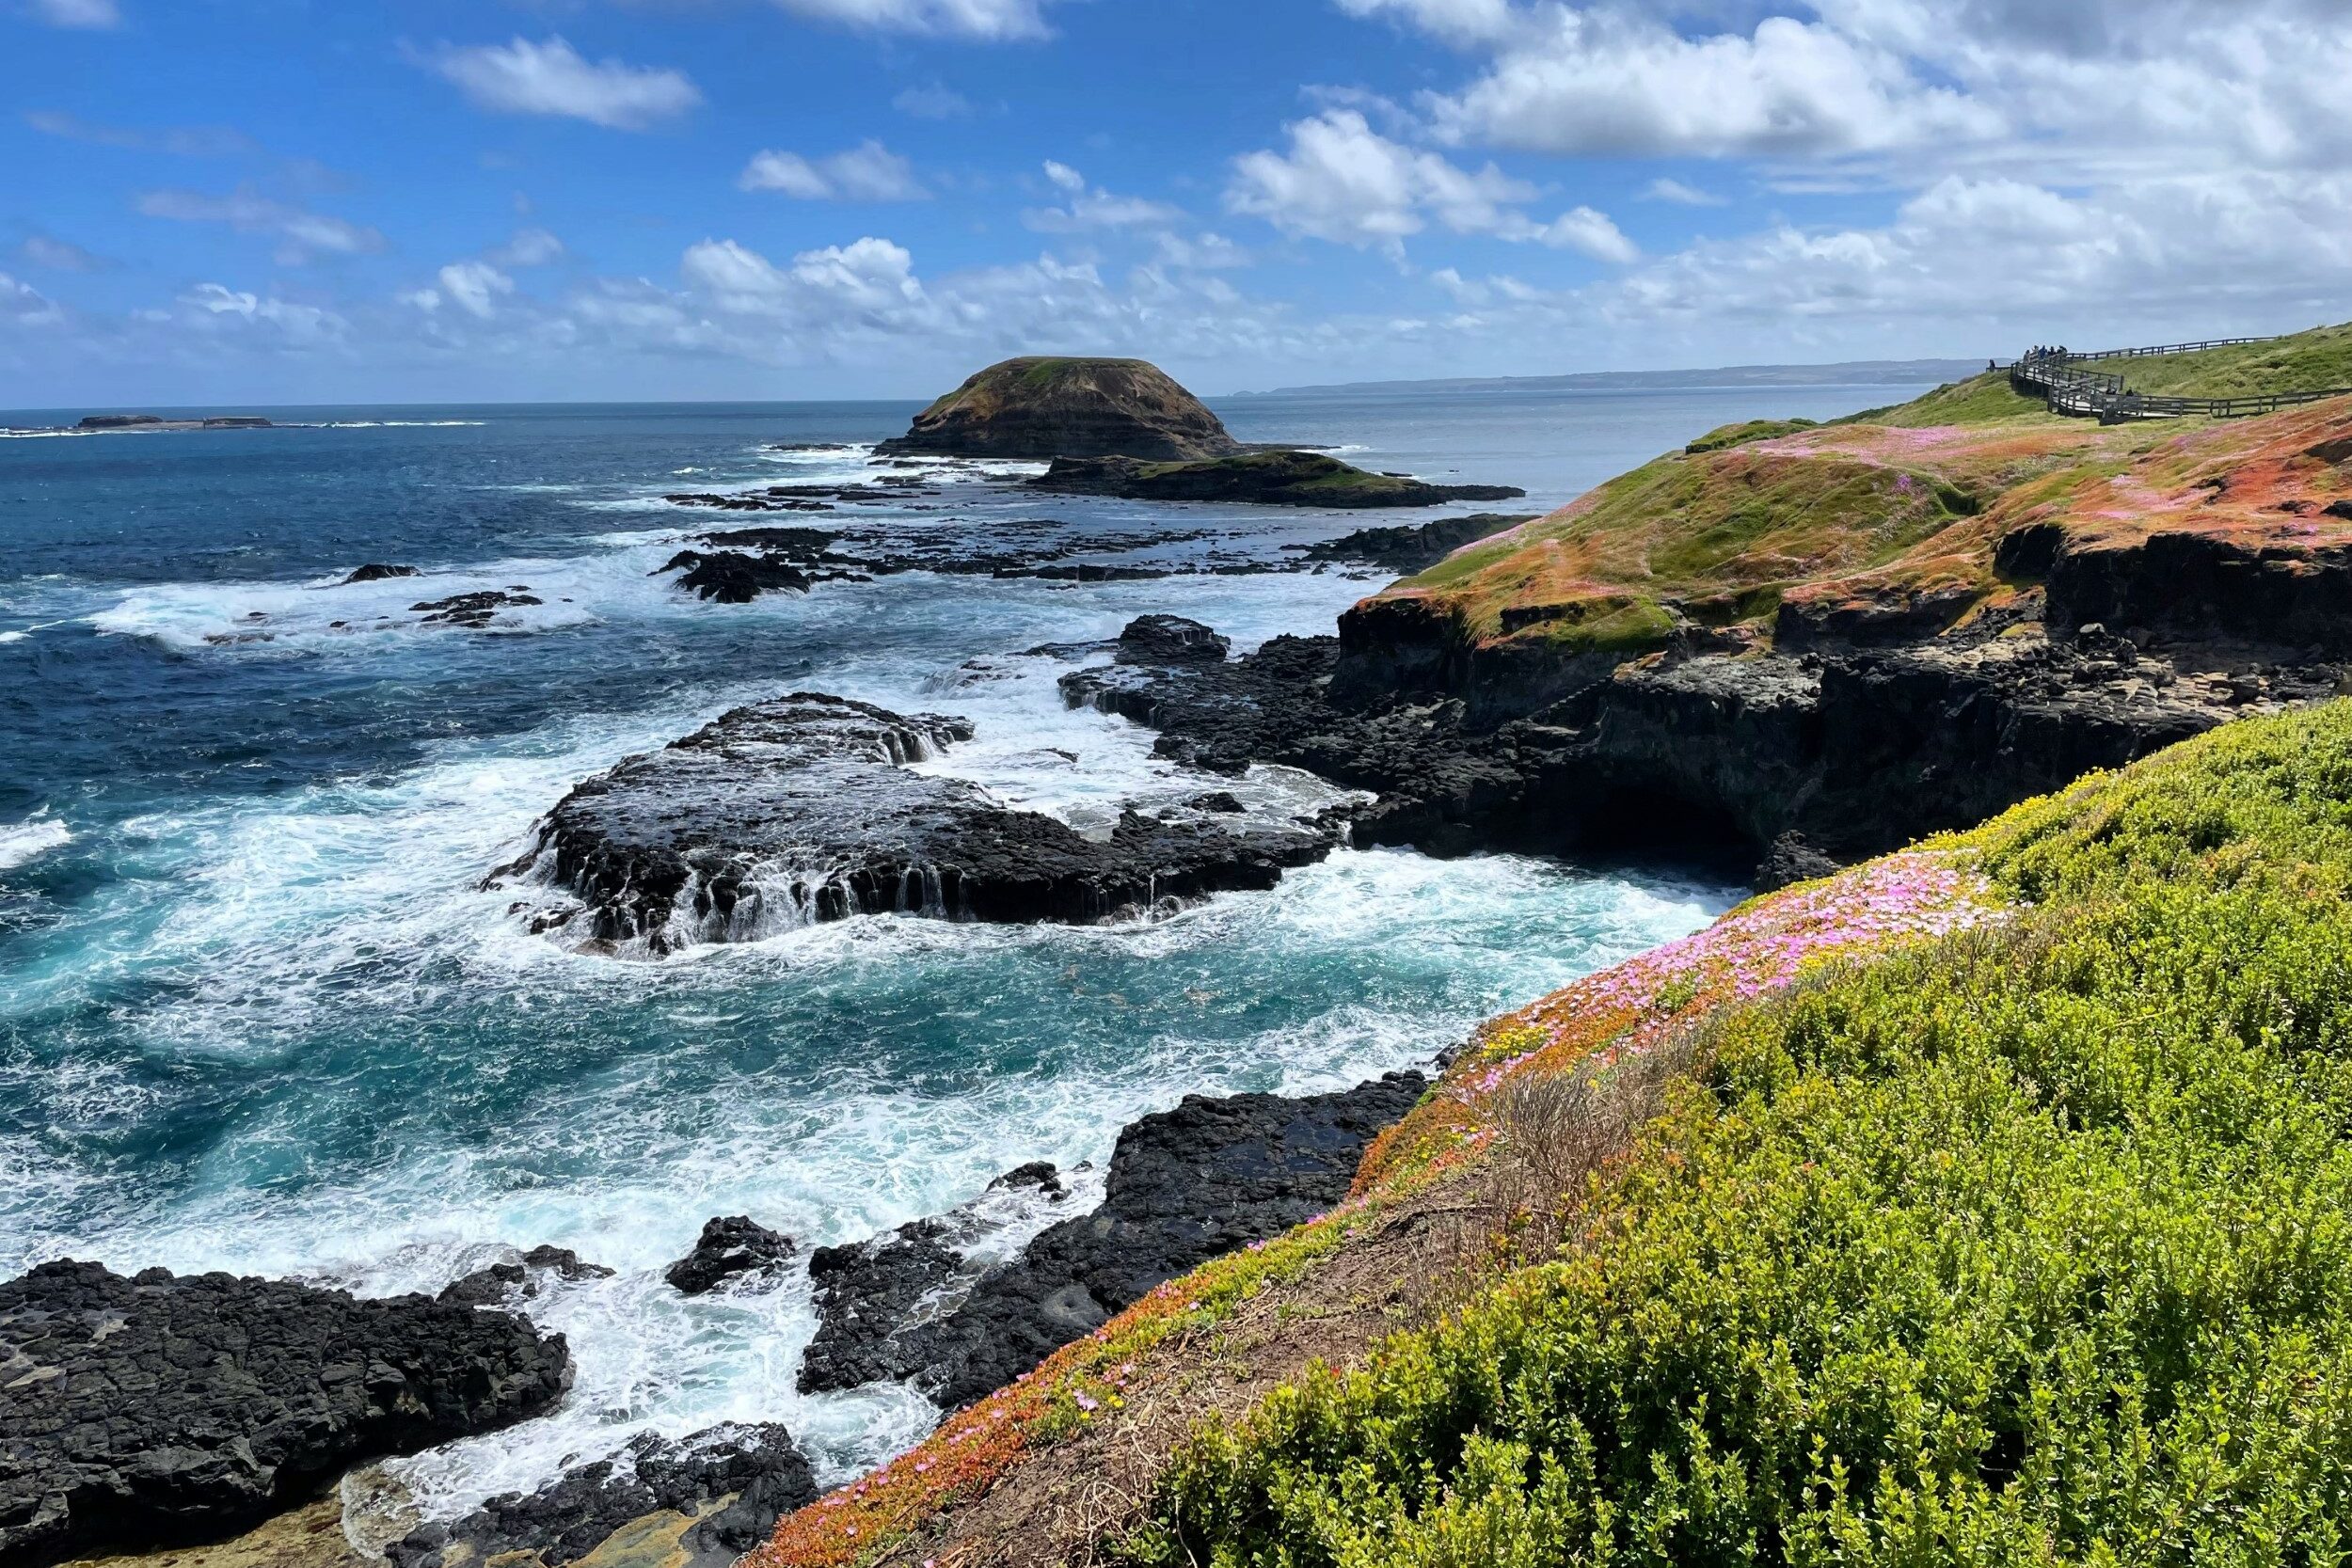 View of the Nobbies and Seal Rocks on Phillip Island, Victoria, Australia, with spring flowers on land in the foreground